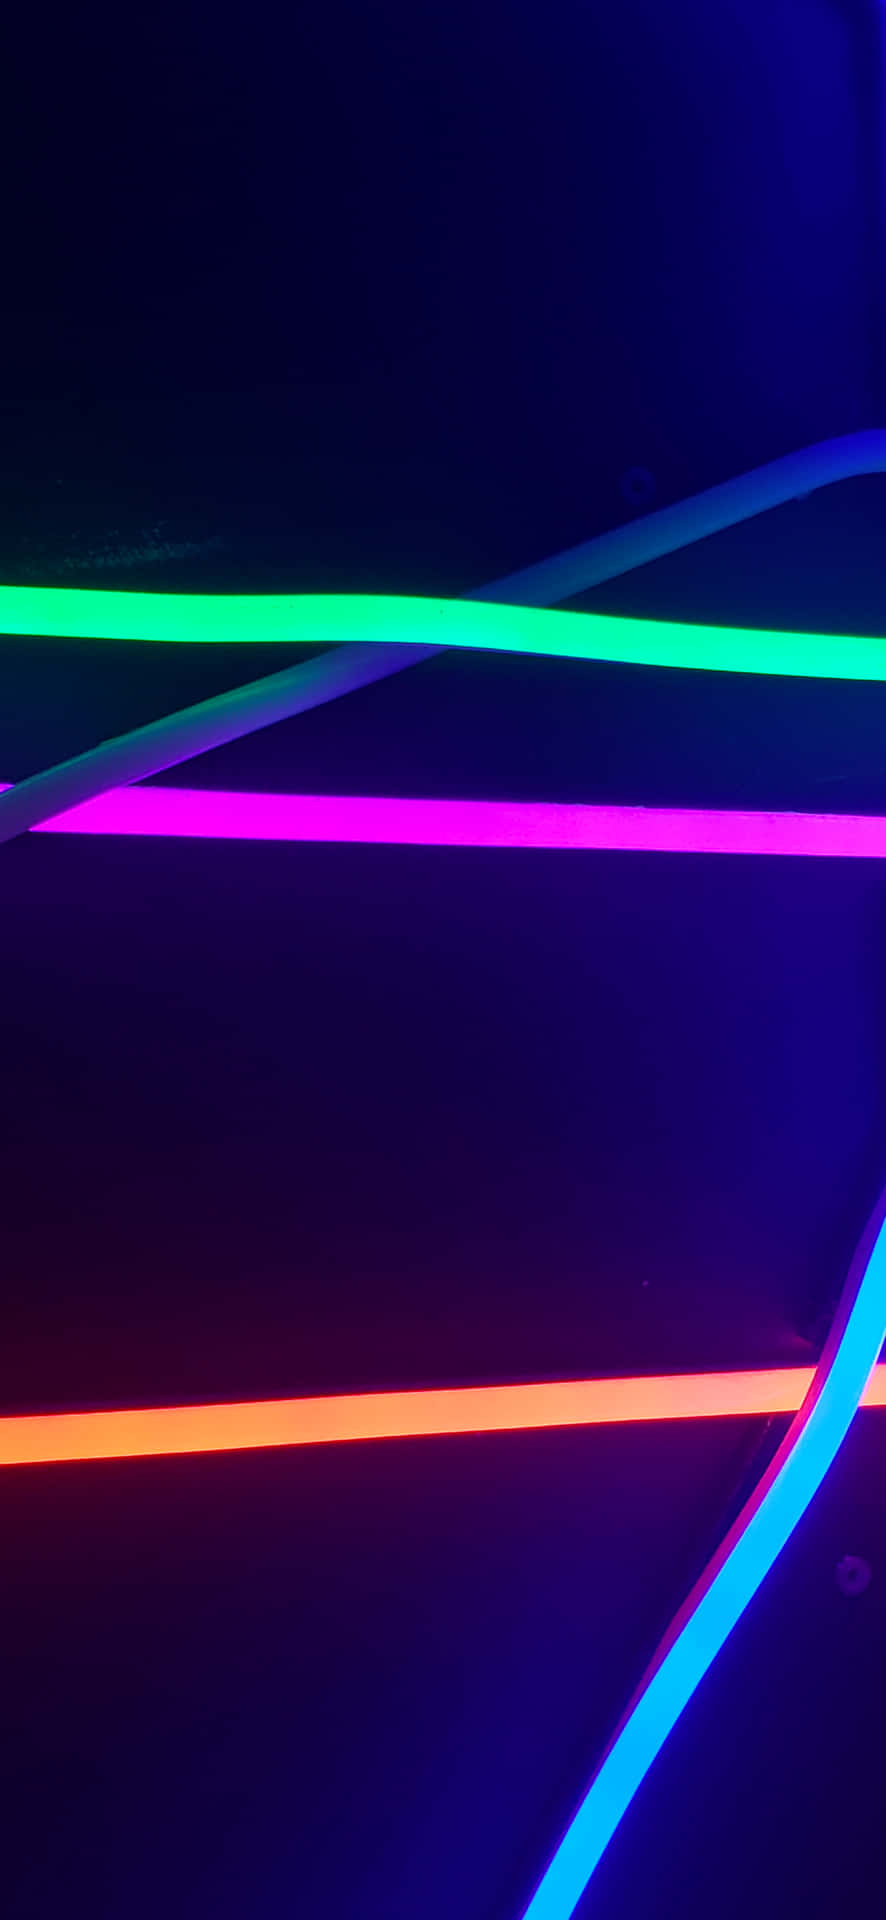 Download Neon Light Lines On A Dark Background | Wallpapers.com